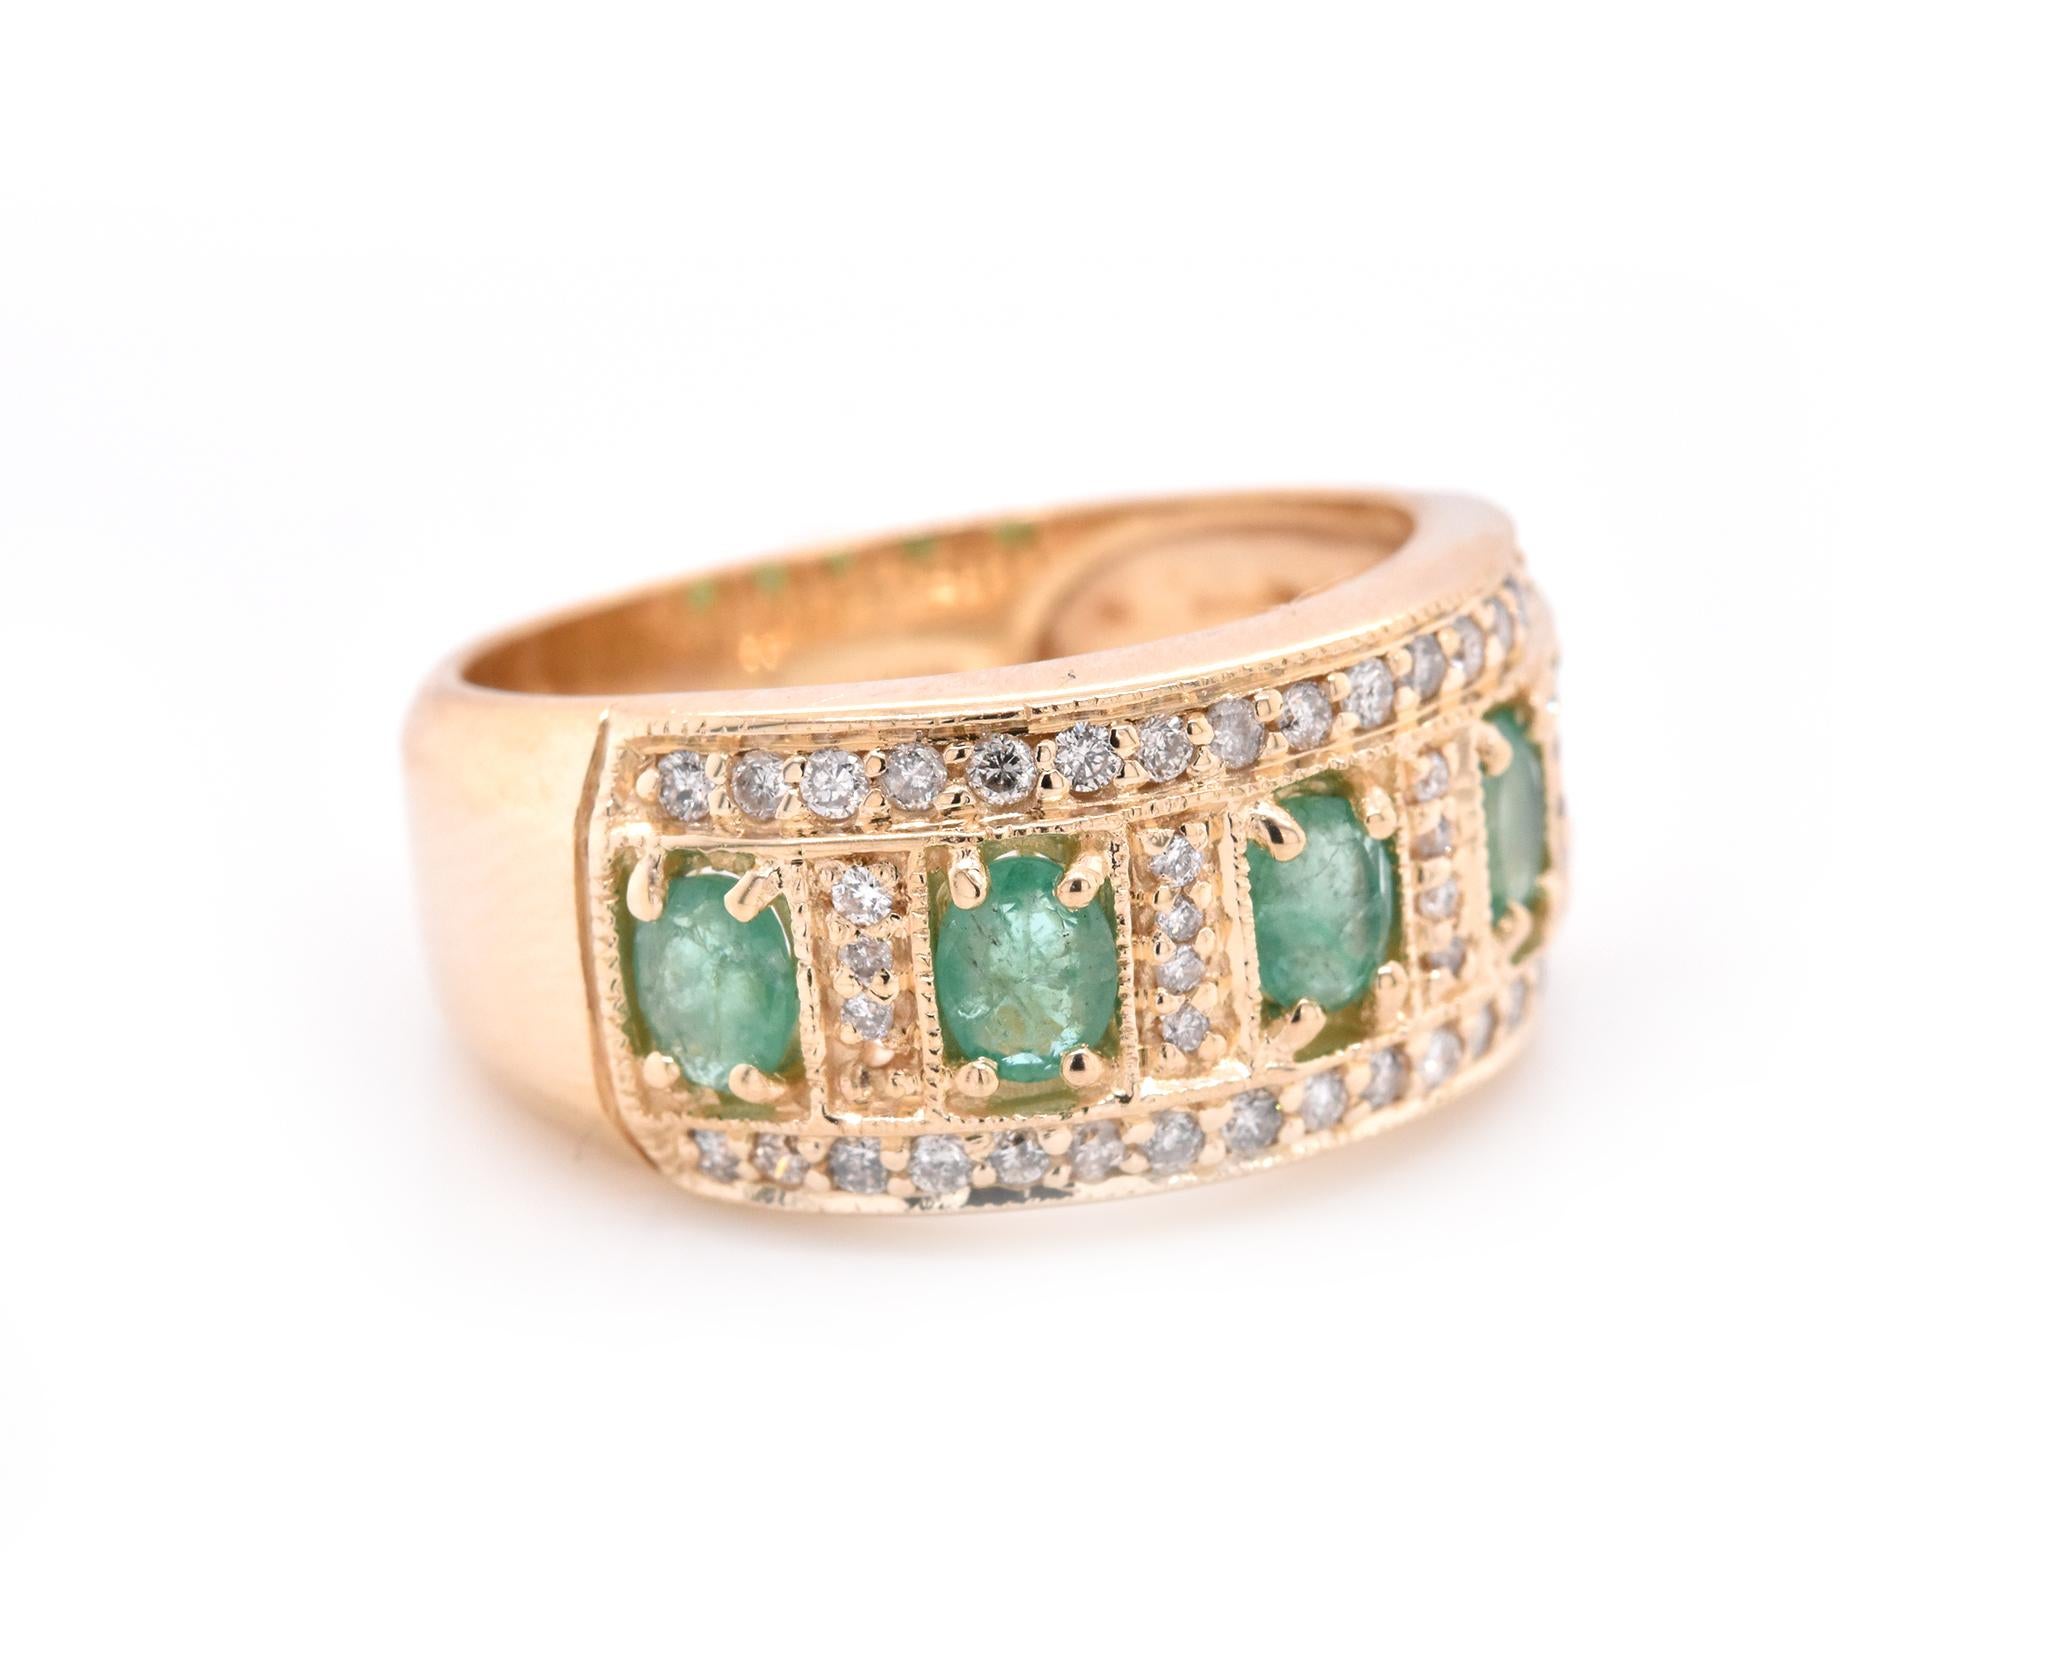 Designer: custom
Material: 14K yellow gold
Emerald: 5 oval cut = .70cttw
Diamond: 56 round brilliant cut = .50cttw
Color: I
Clarity: SI2
Ring Size: 8 (please allow up to 2 additional business days for sizing requests)
Dimensions: ring measures 9.9mm